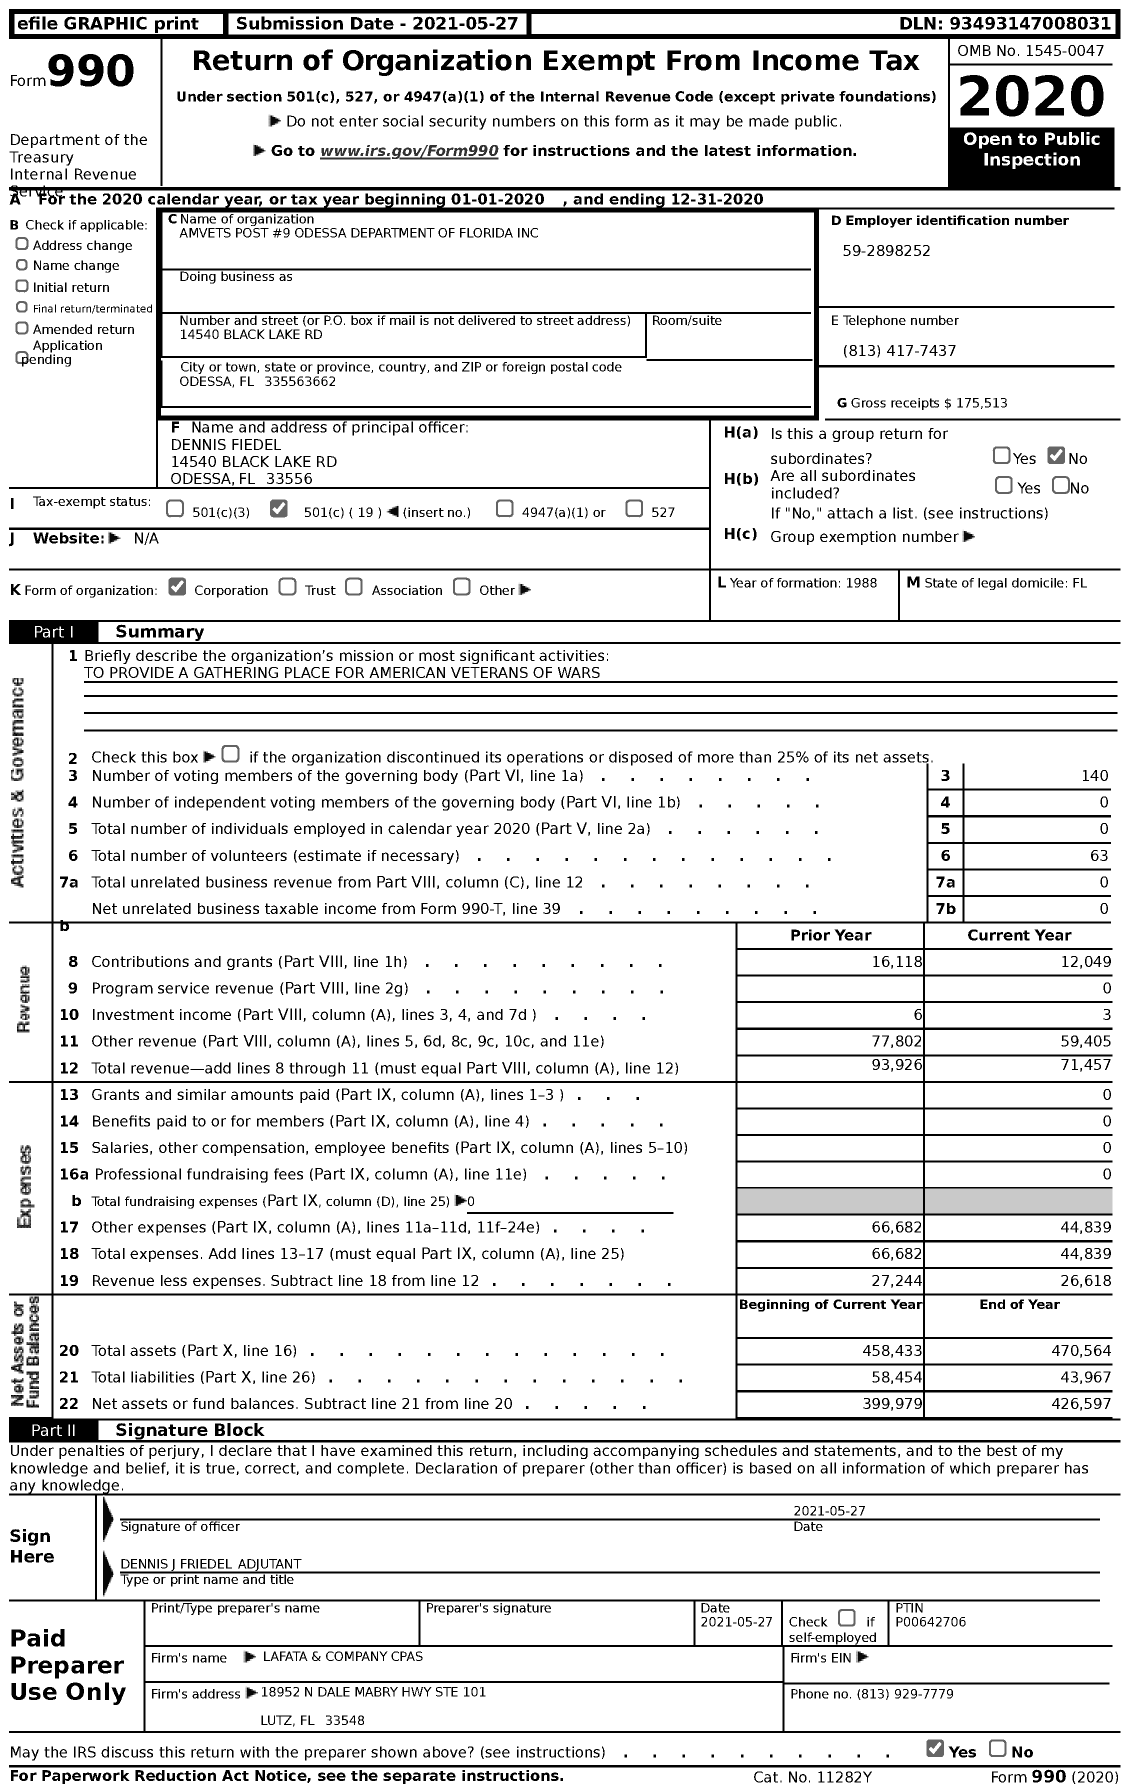 Image of first page of 2020 Form 990 for Amvets Post #9 Odessa Department of Florida